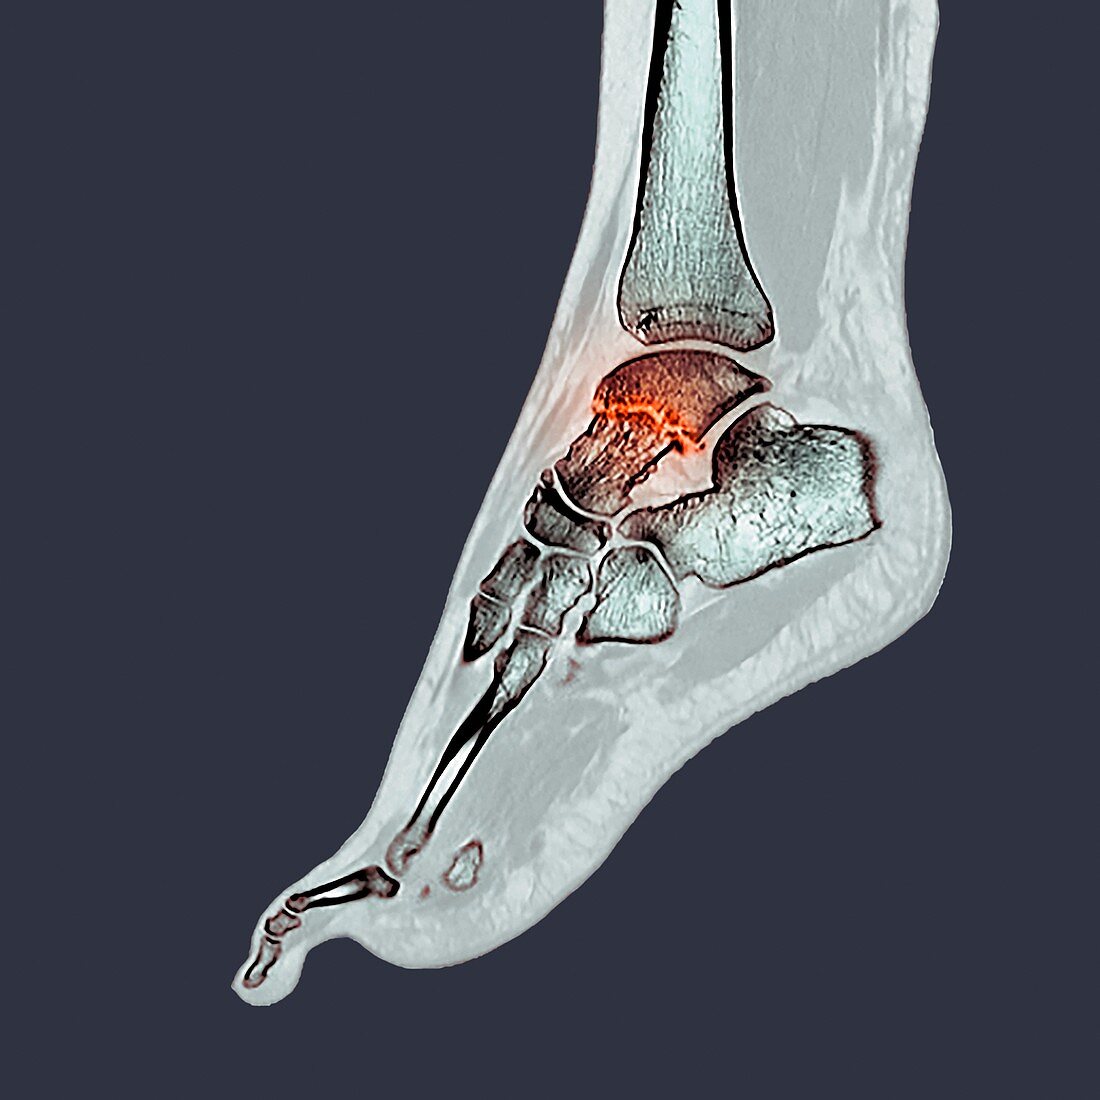 Fractured ankle bone, CT scan